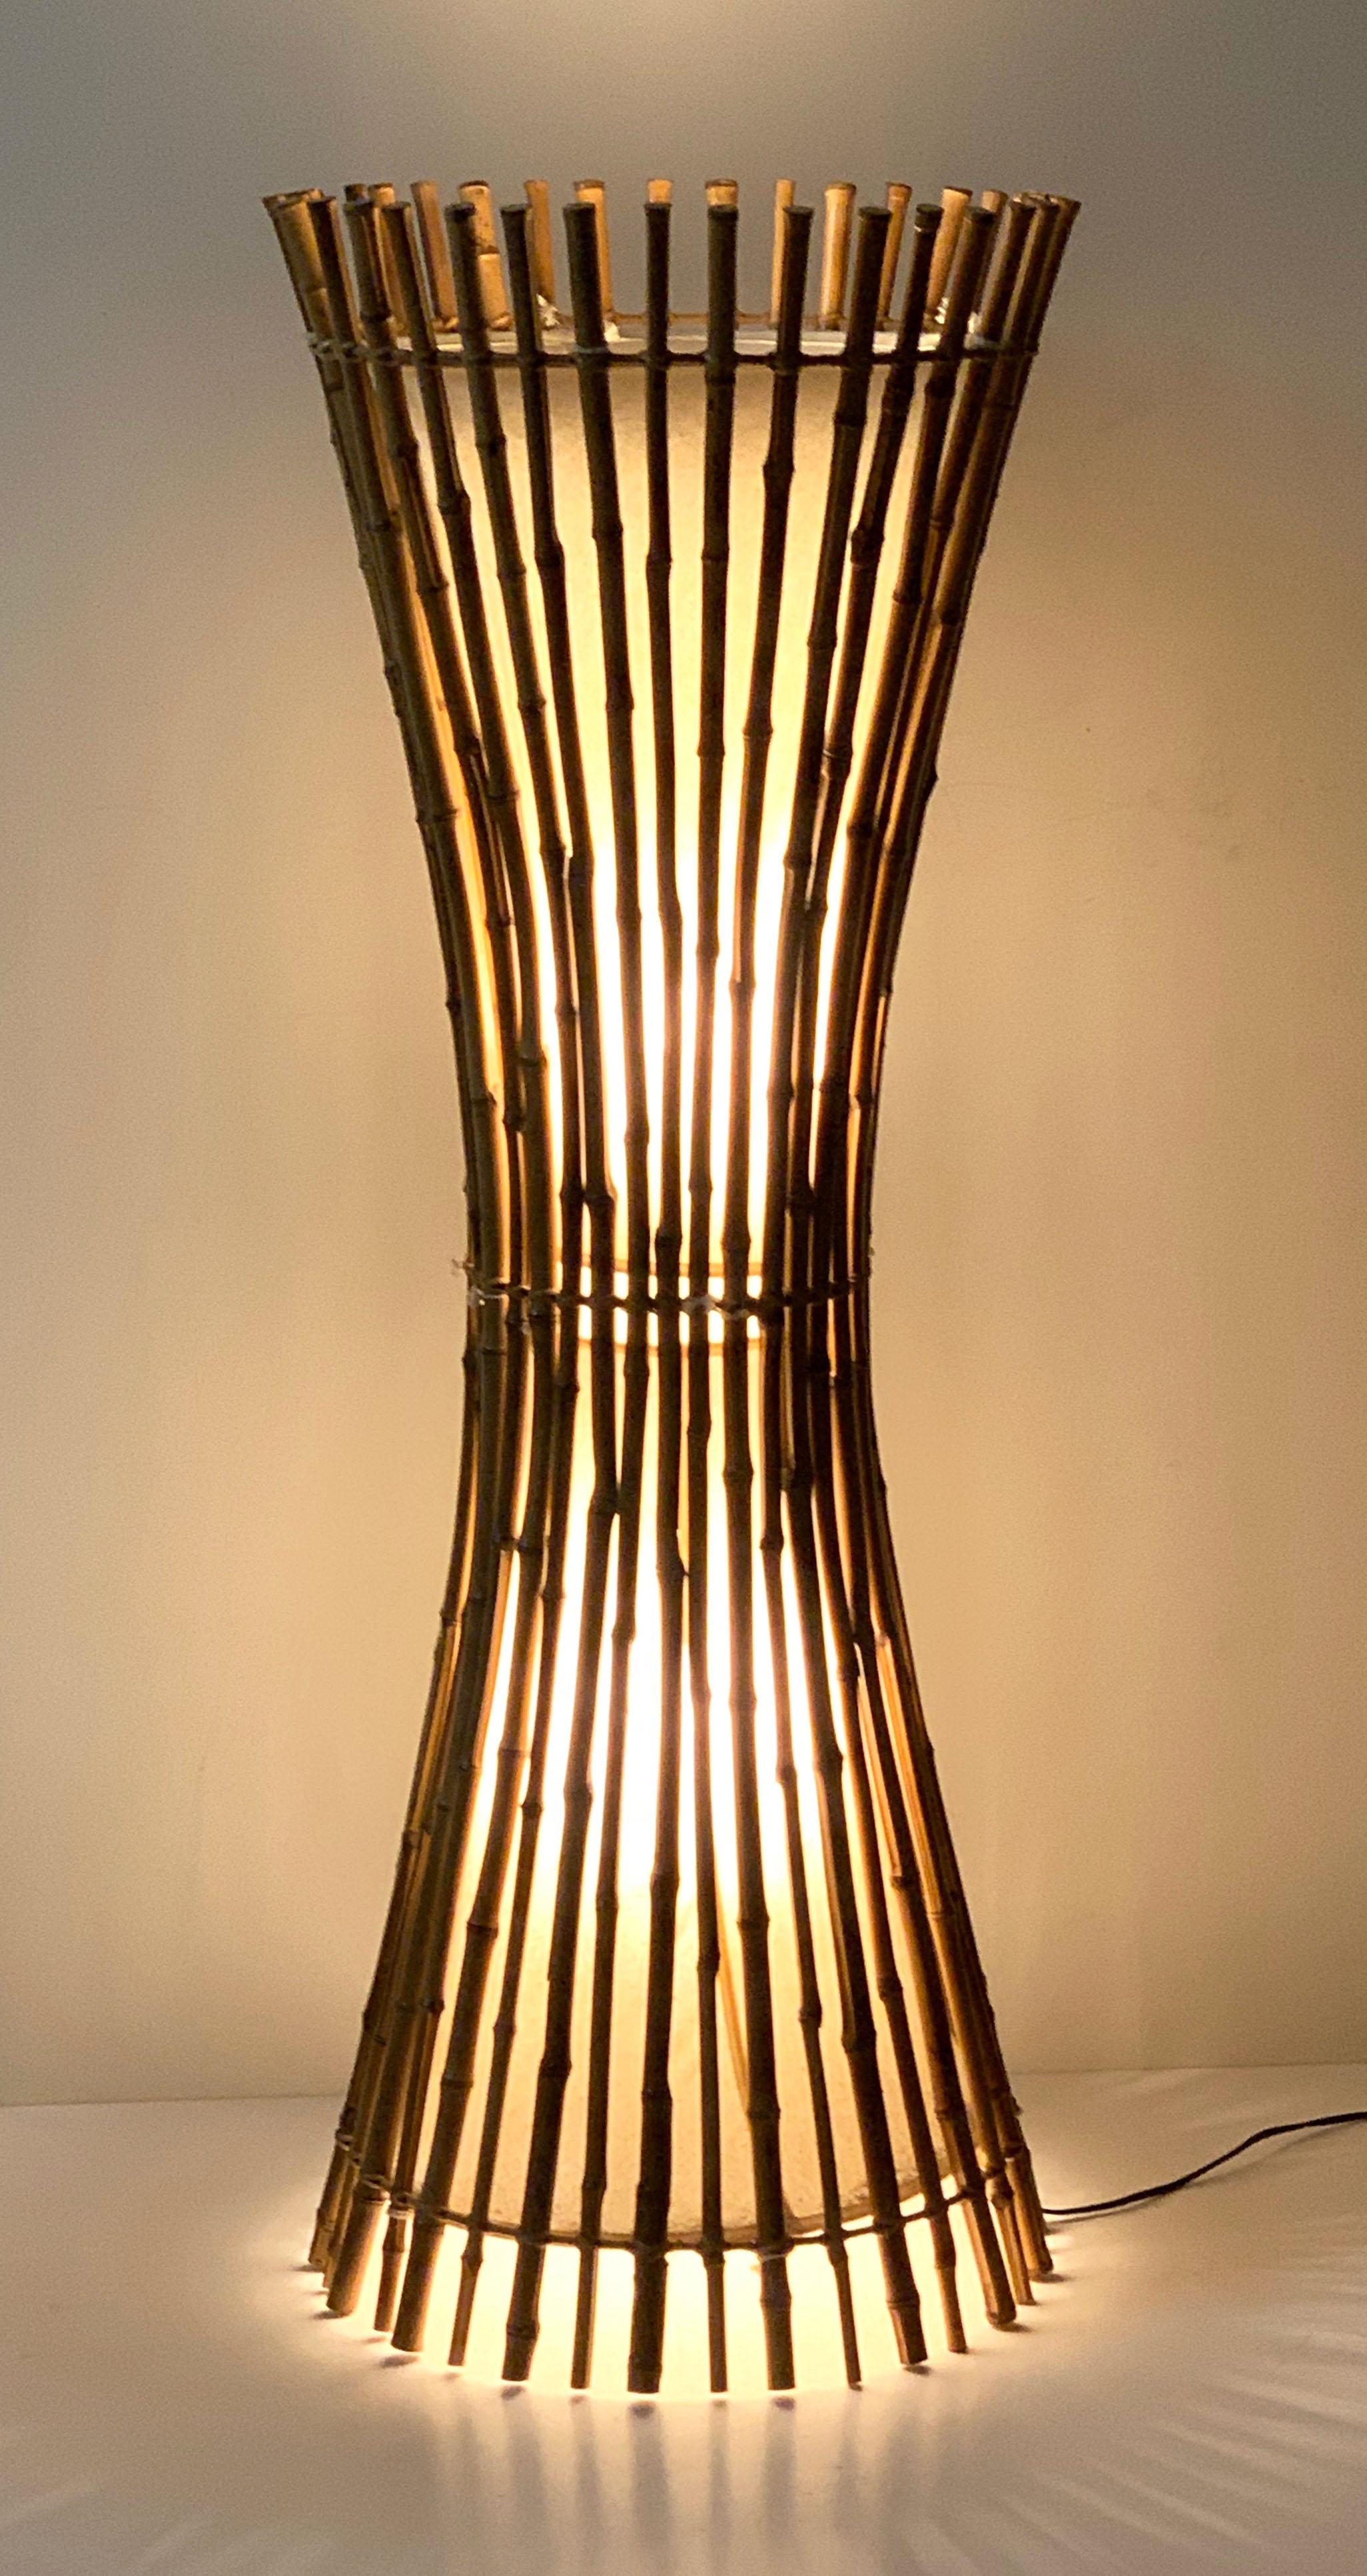 Midcentury Bamboo and Rattan Italian Floor Lamp after Franco Albini, 1960s For Sale 5